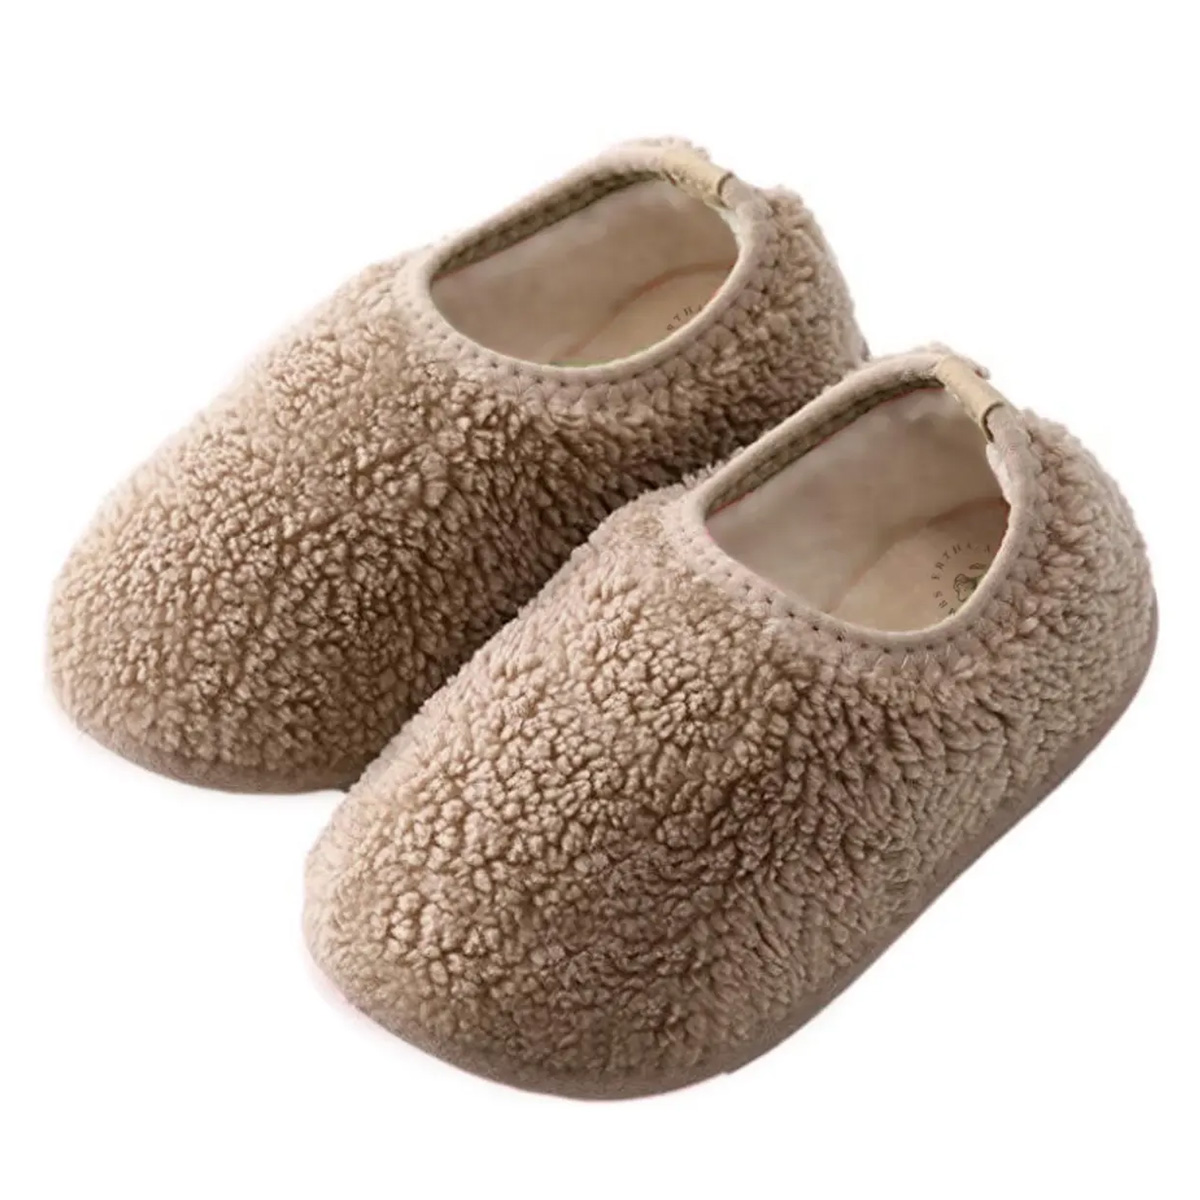 Chaussons et chaussures Chaussons Moumoute Taupe - 23/24 Chaussons Moumoute Taupe - 23/24